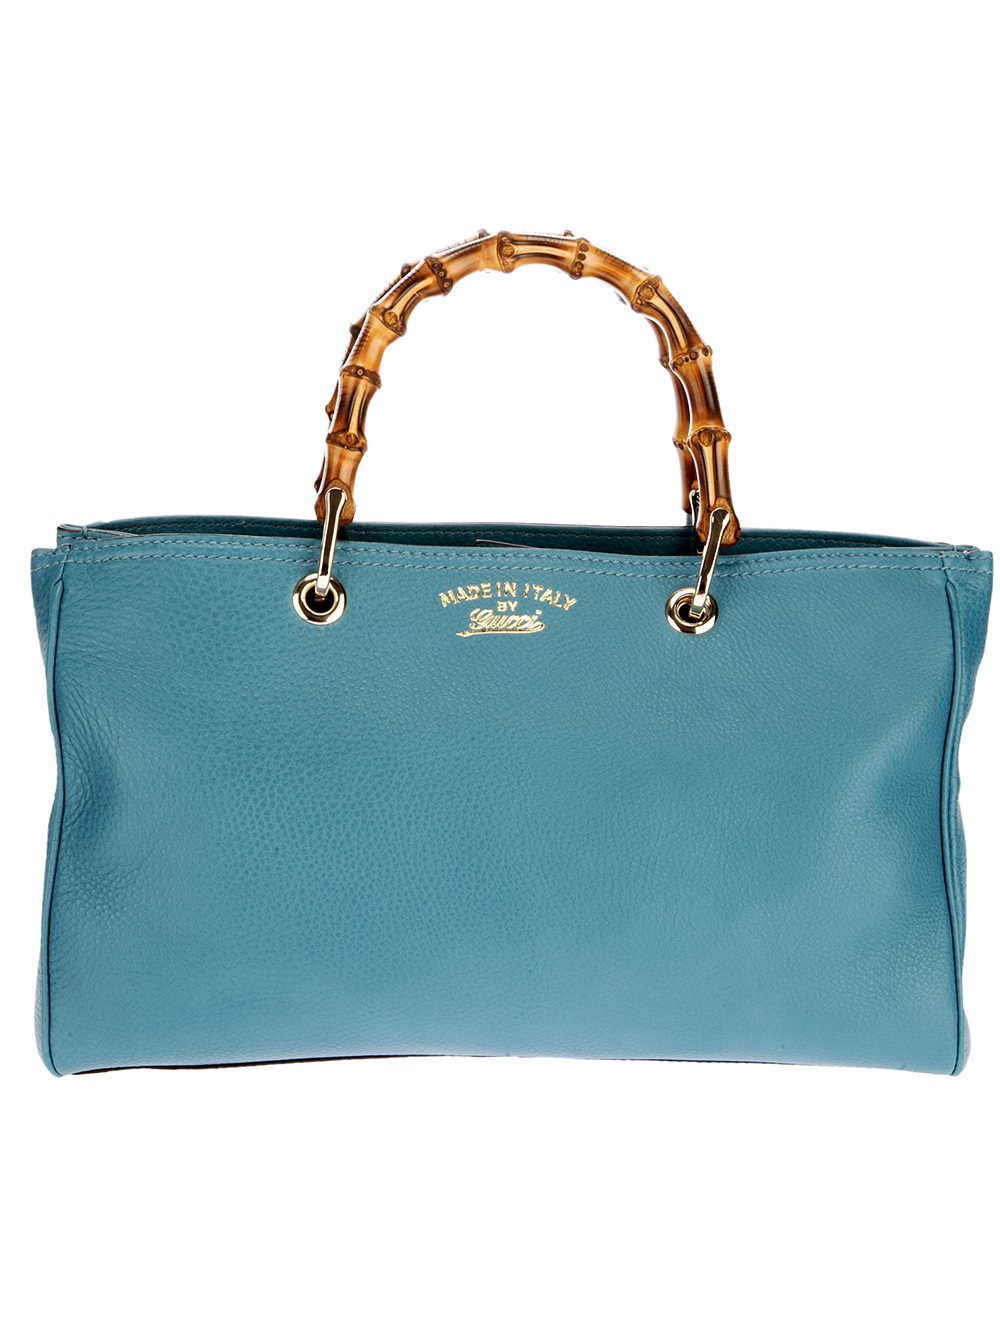 Gucci Bamboo Shoulder Bag in Blue | Lyst